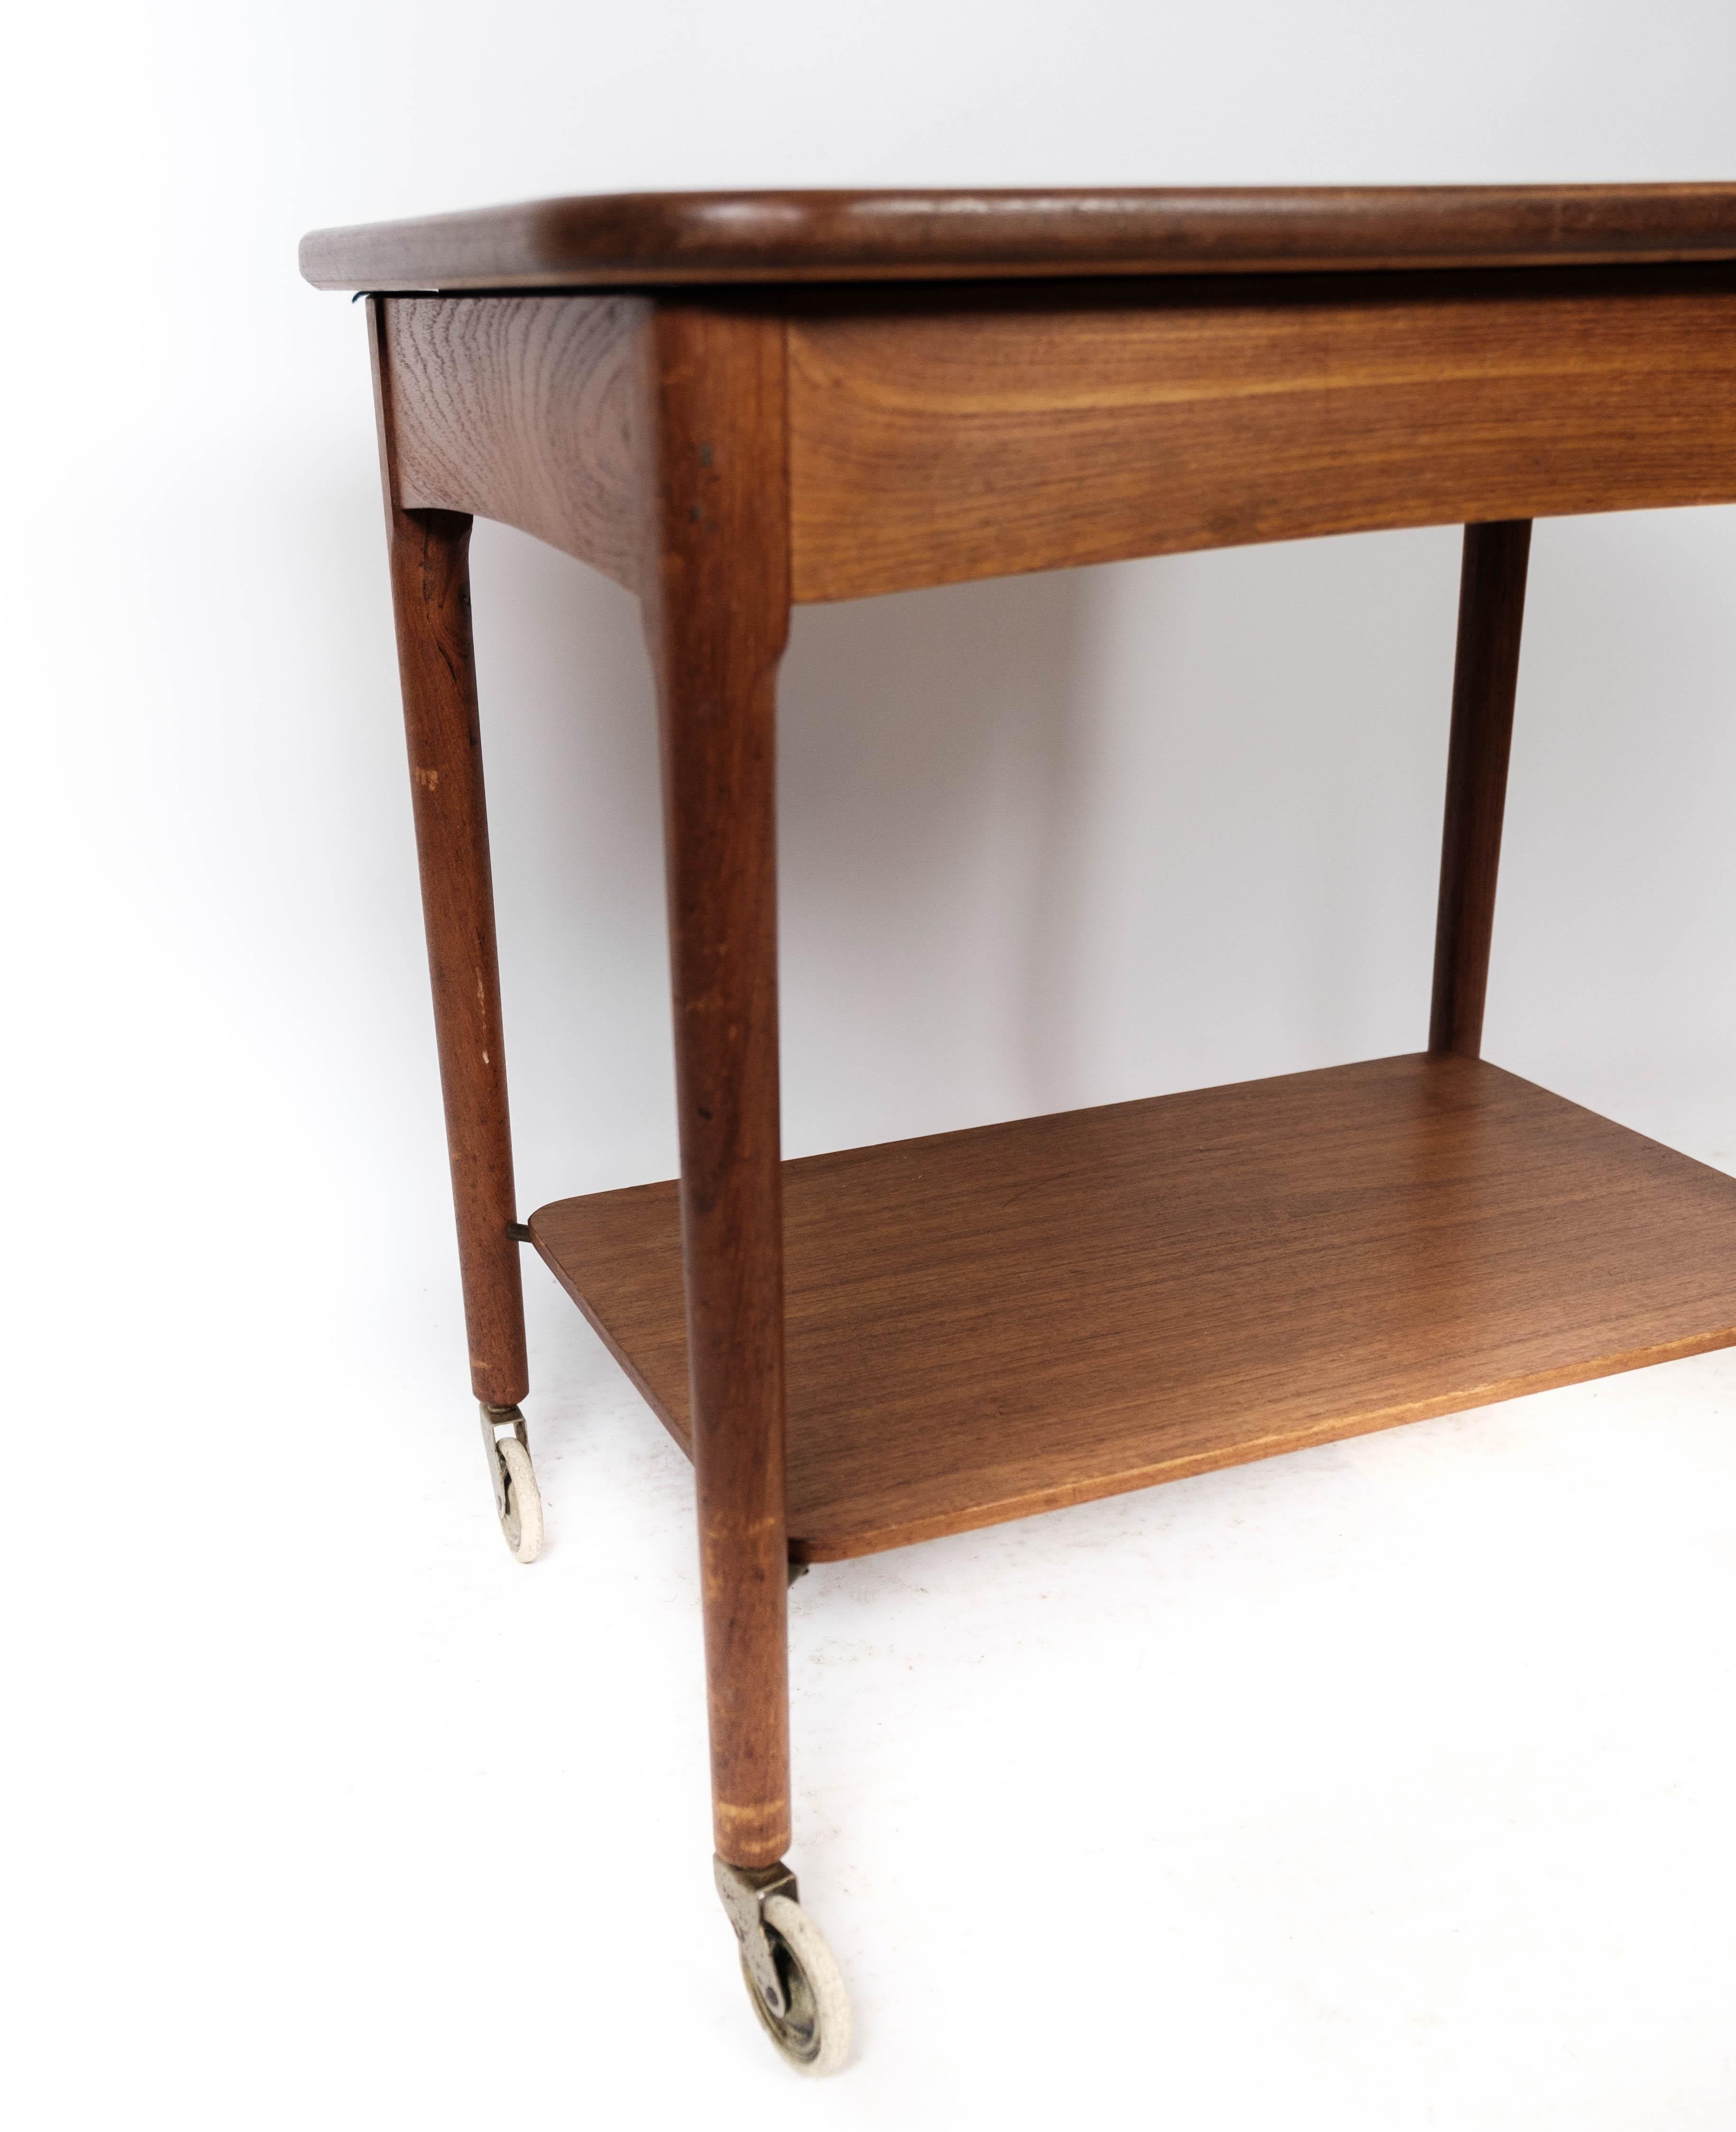 Mid-Century Modern Side Table On Wheels Made In Teak Of Danish Design From 1960s For Sale